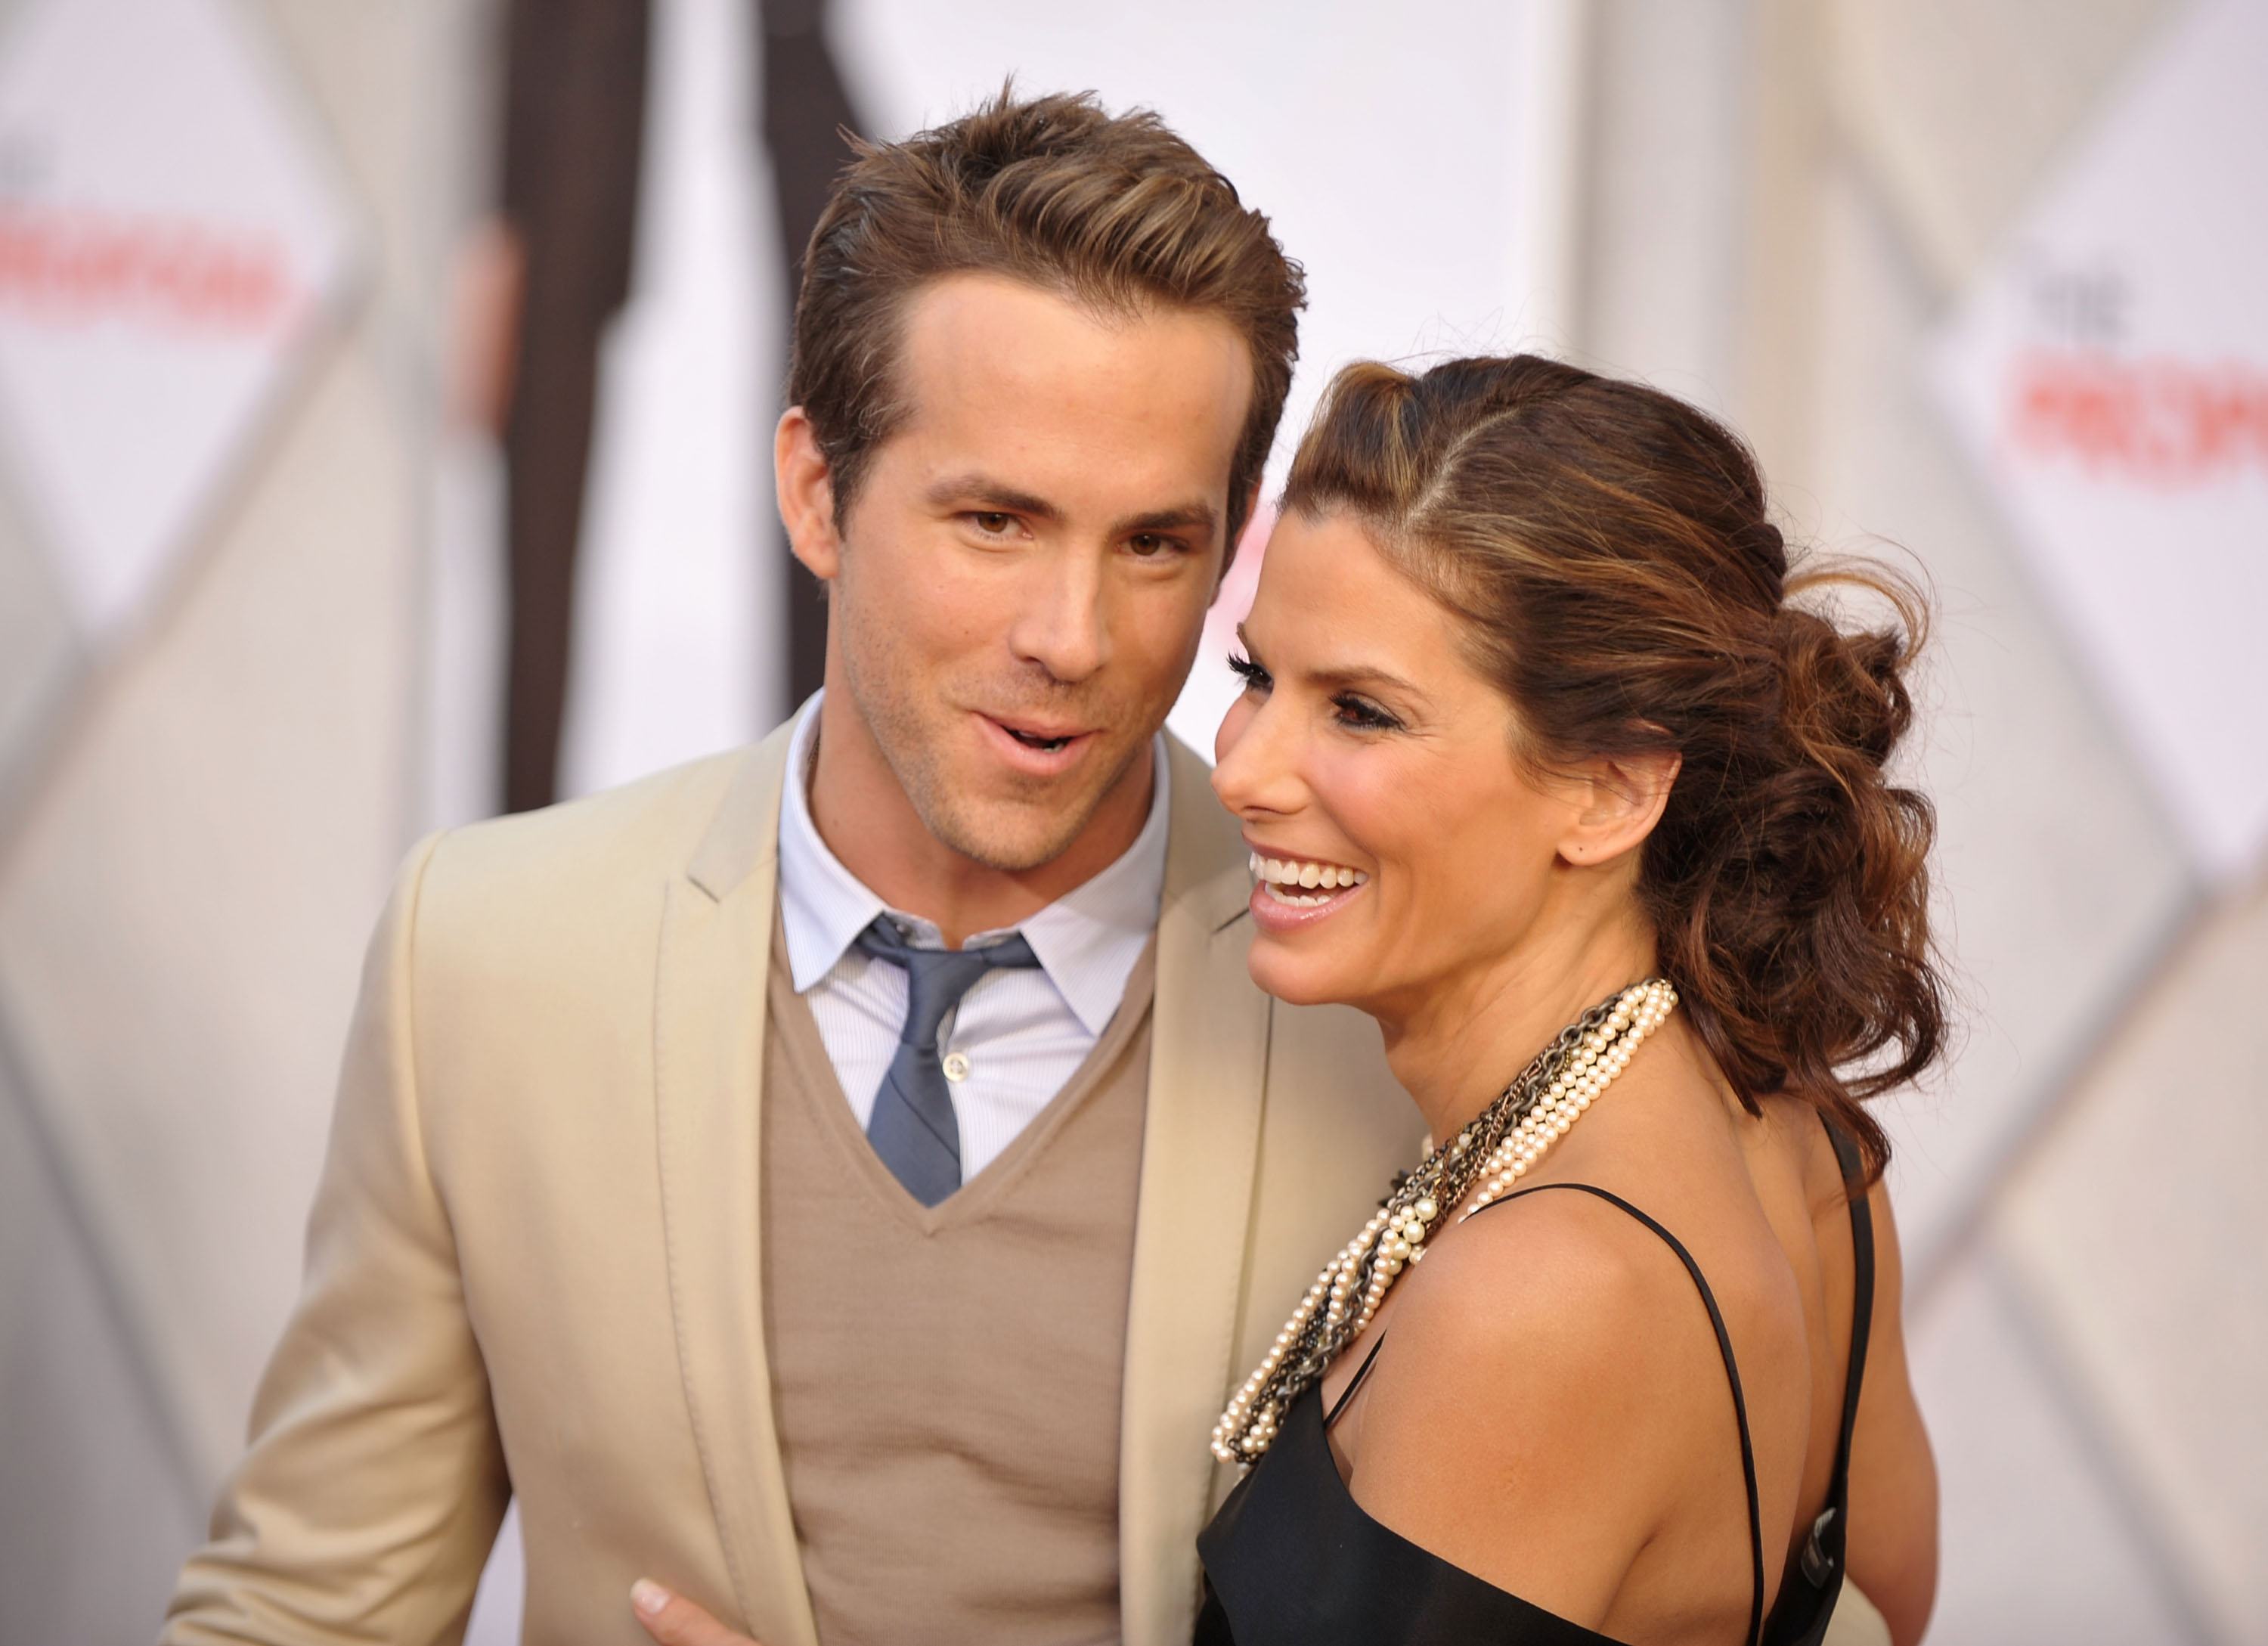 Ryan Reynolds and Sandra Bullock arrive at the Los Angeles premiere of "The Proposal" at the El Capitan Theatre, on June 1, 2009, in Hollywood, California. | Source: Getty Images